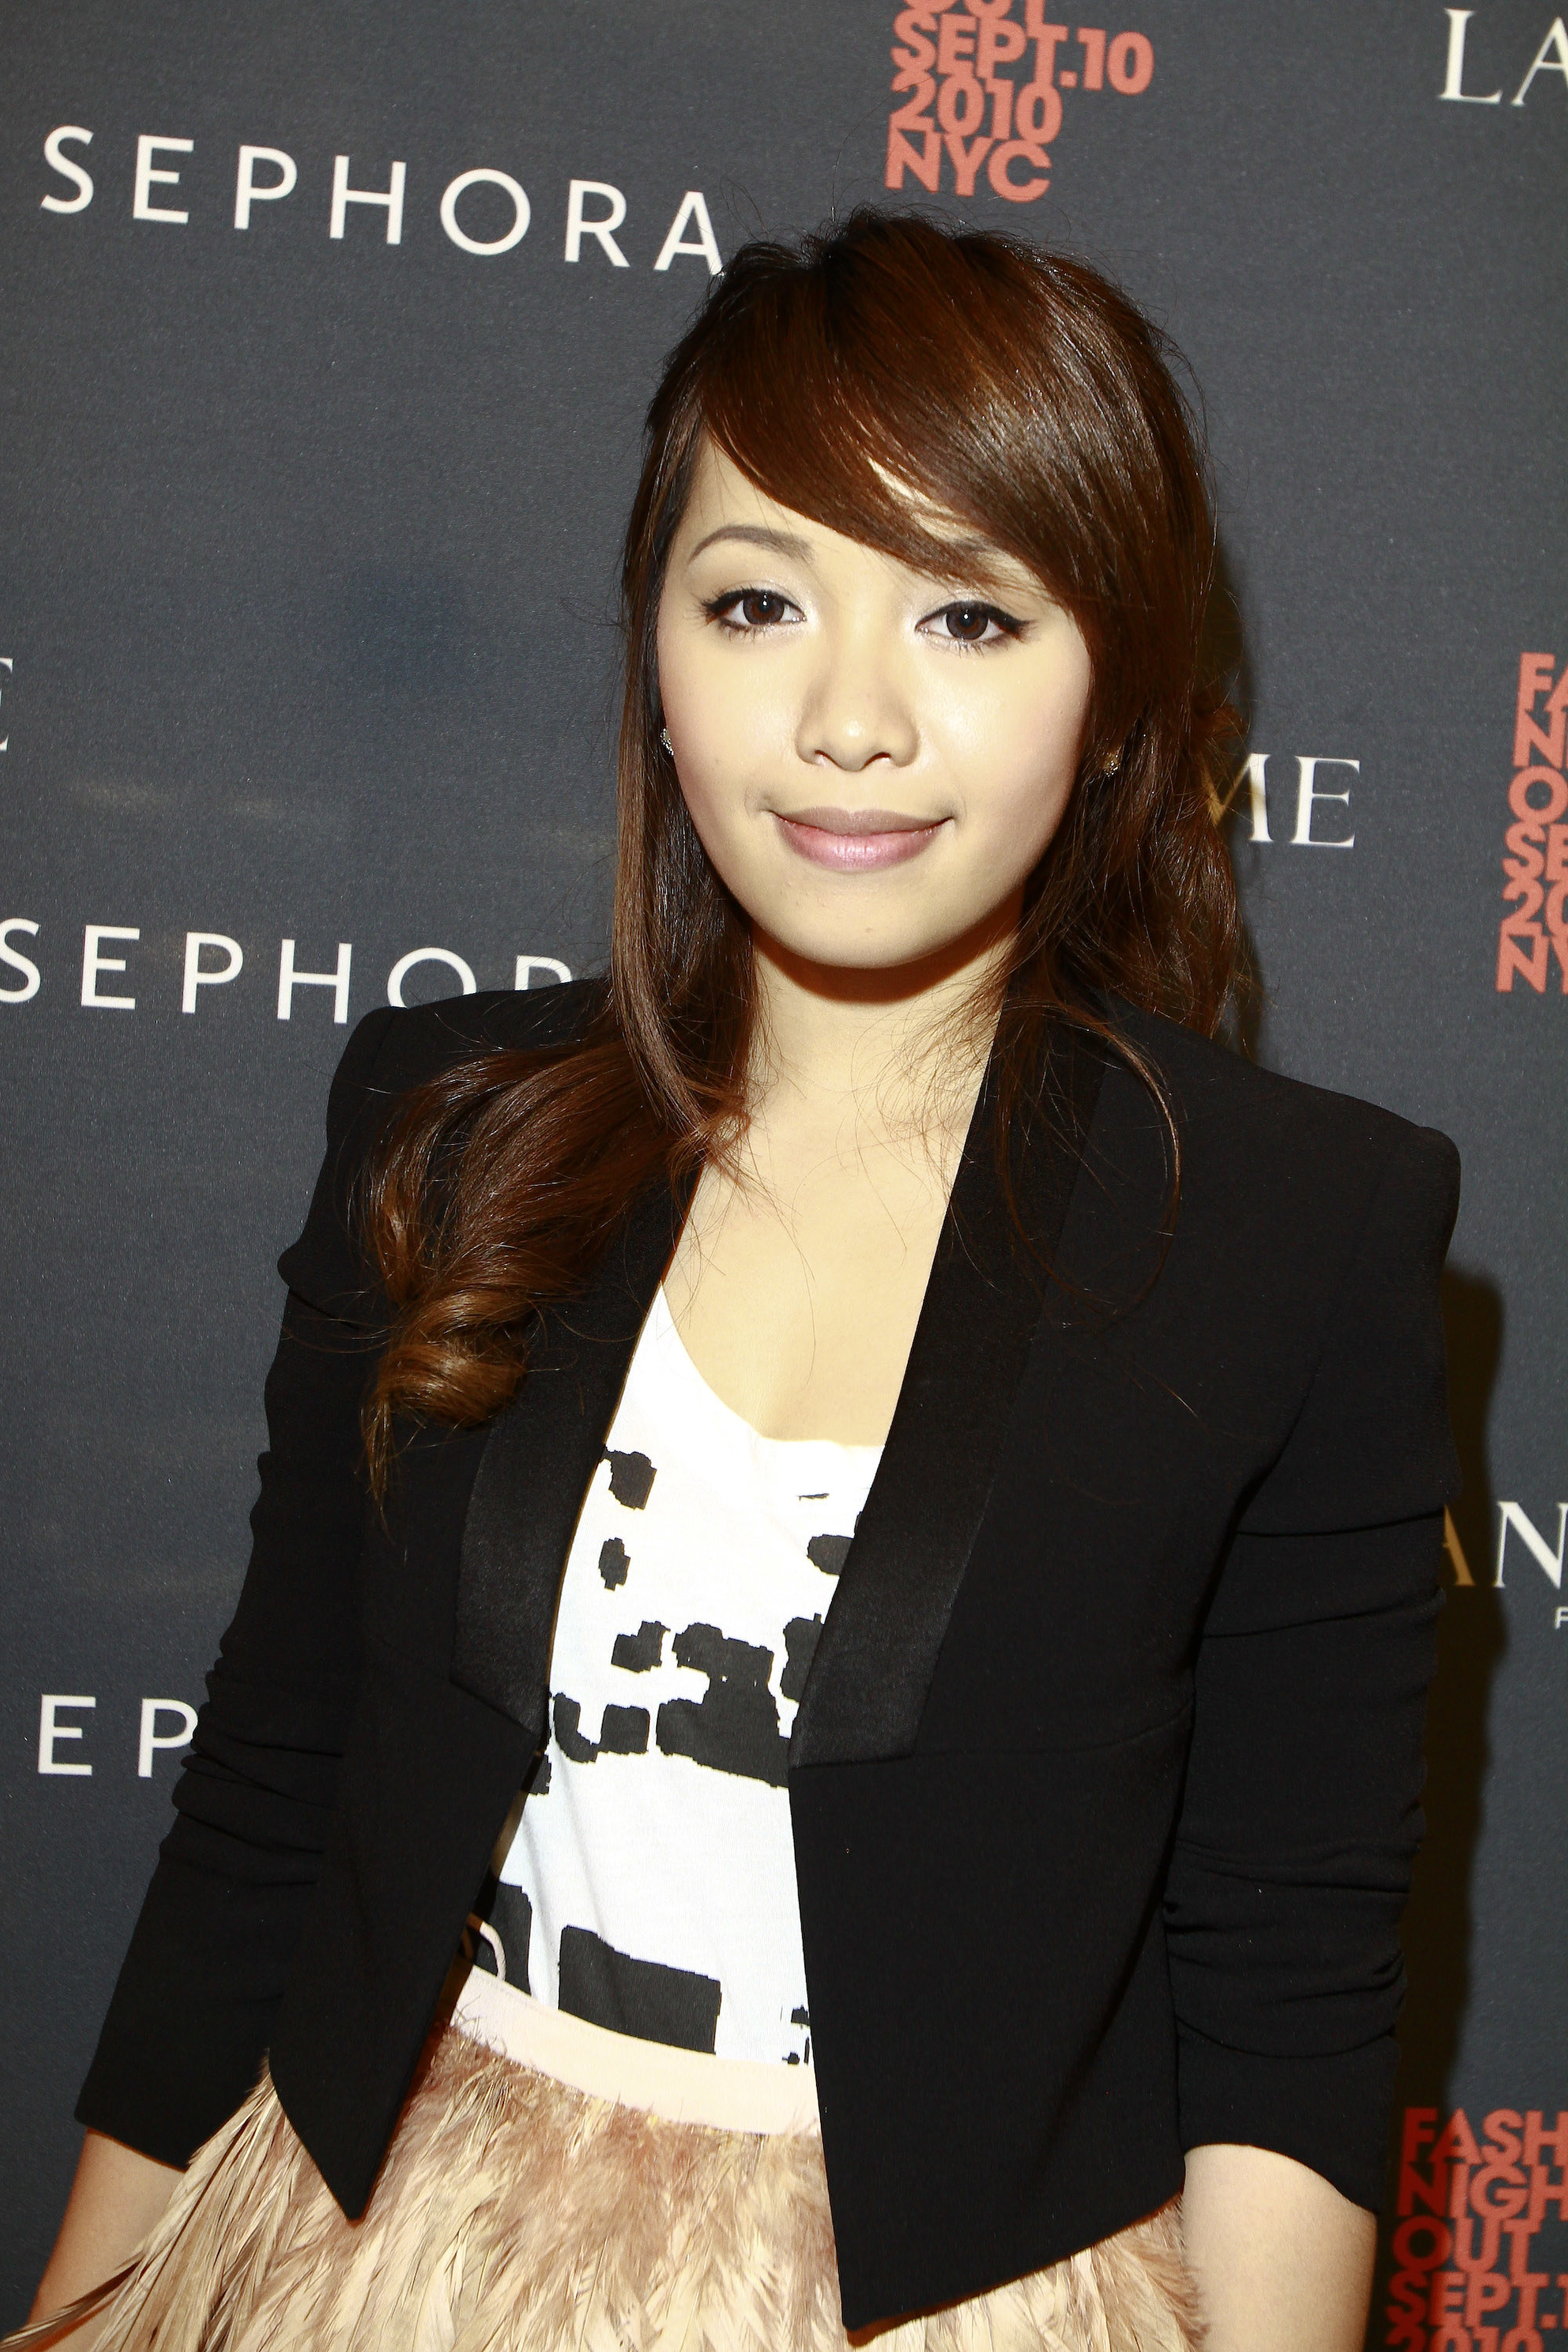 Michelle Phan at the Sephora celebration of Fashion&#x27;s Night Out on September 10, 2010